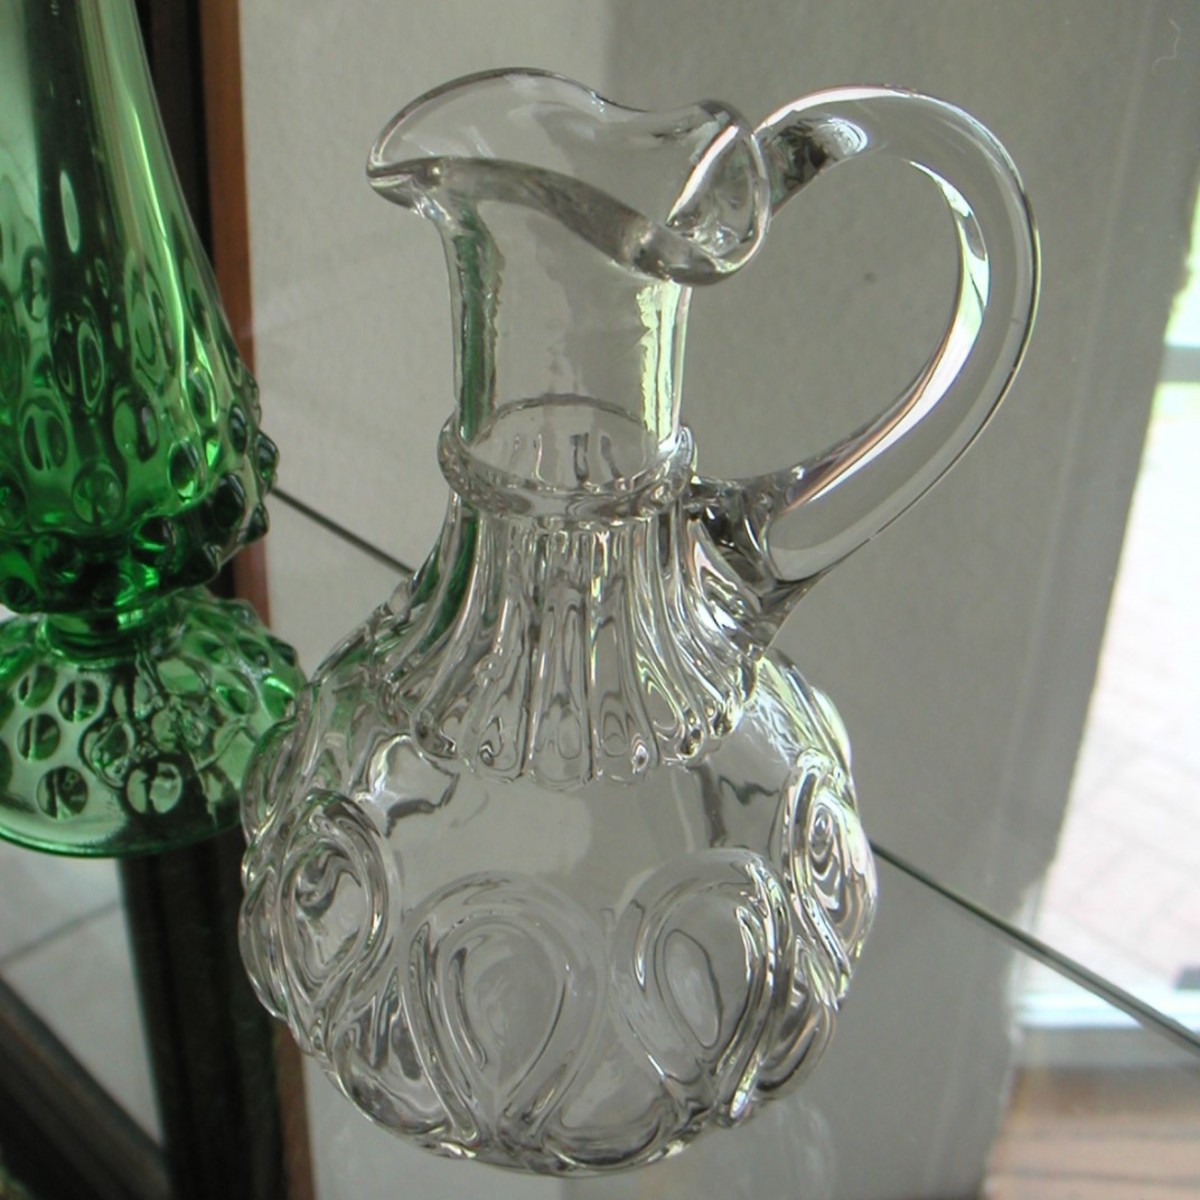 Ribbon Candy Pitcher from the late 1800s